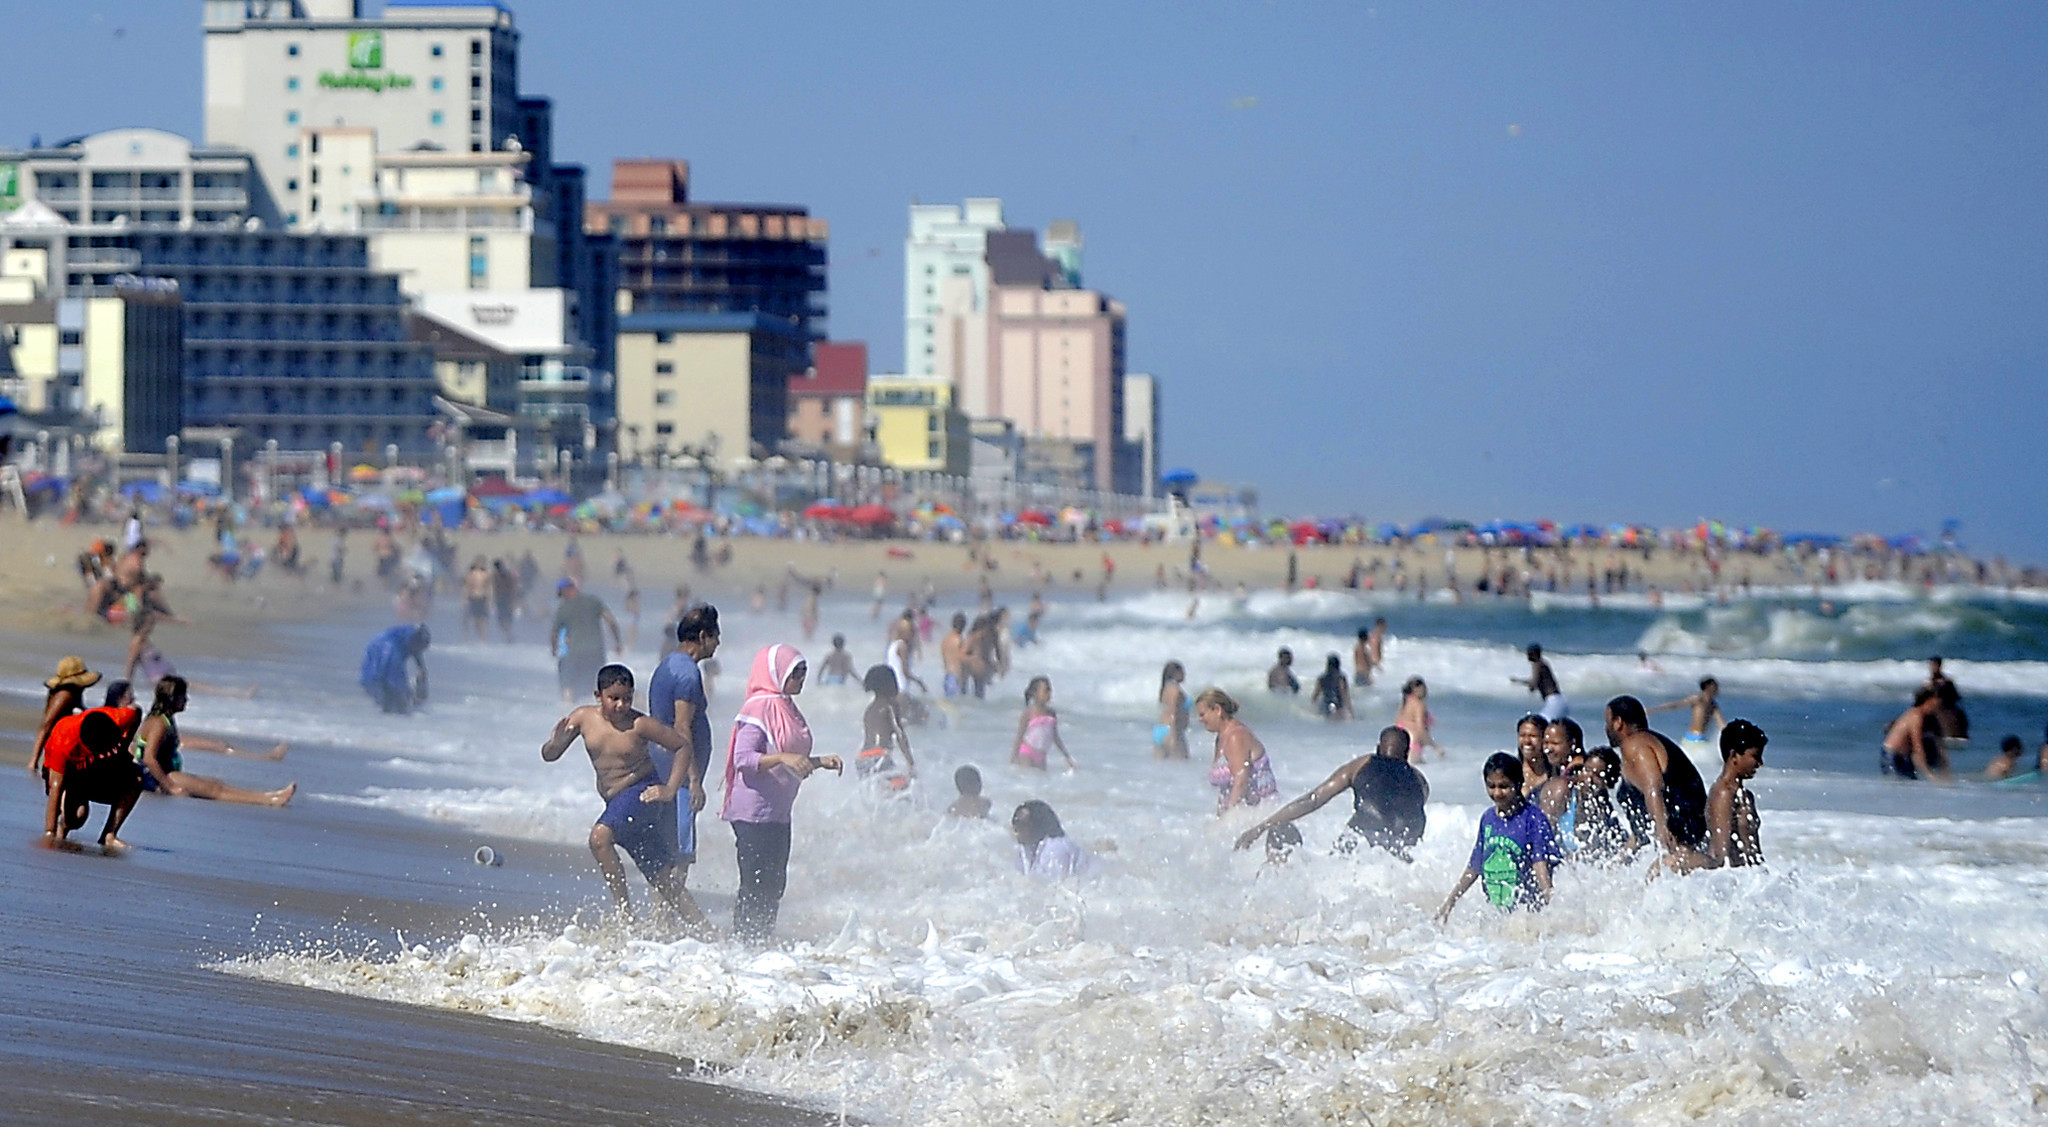 Ocean City named one of the top 10 U.S. beaches by